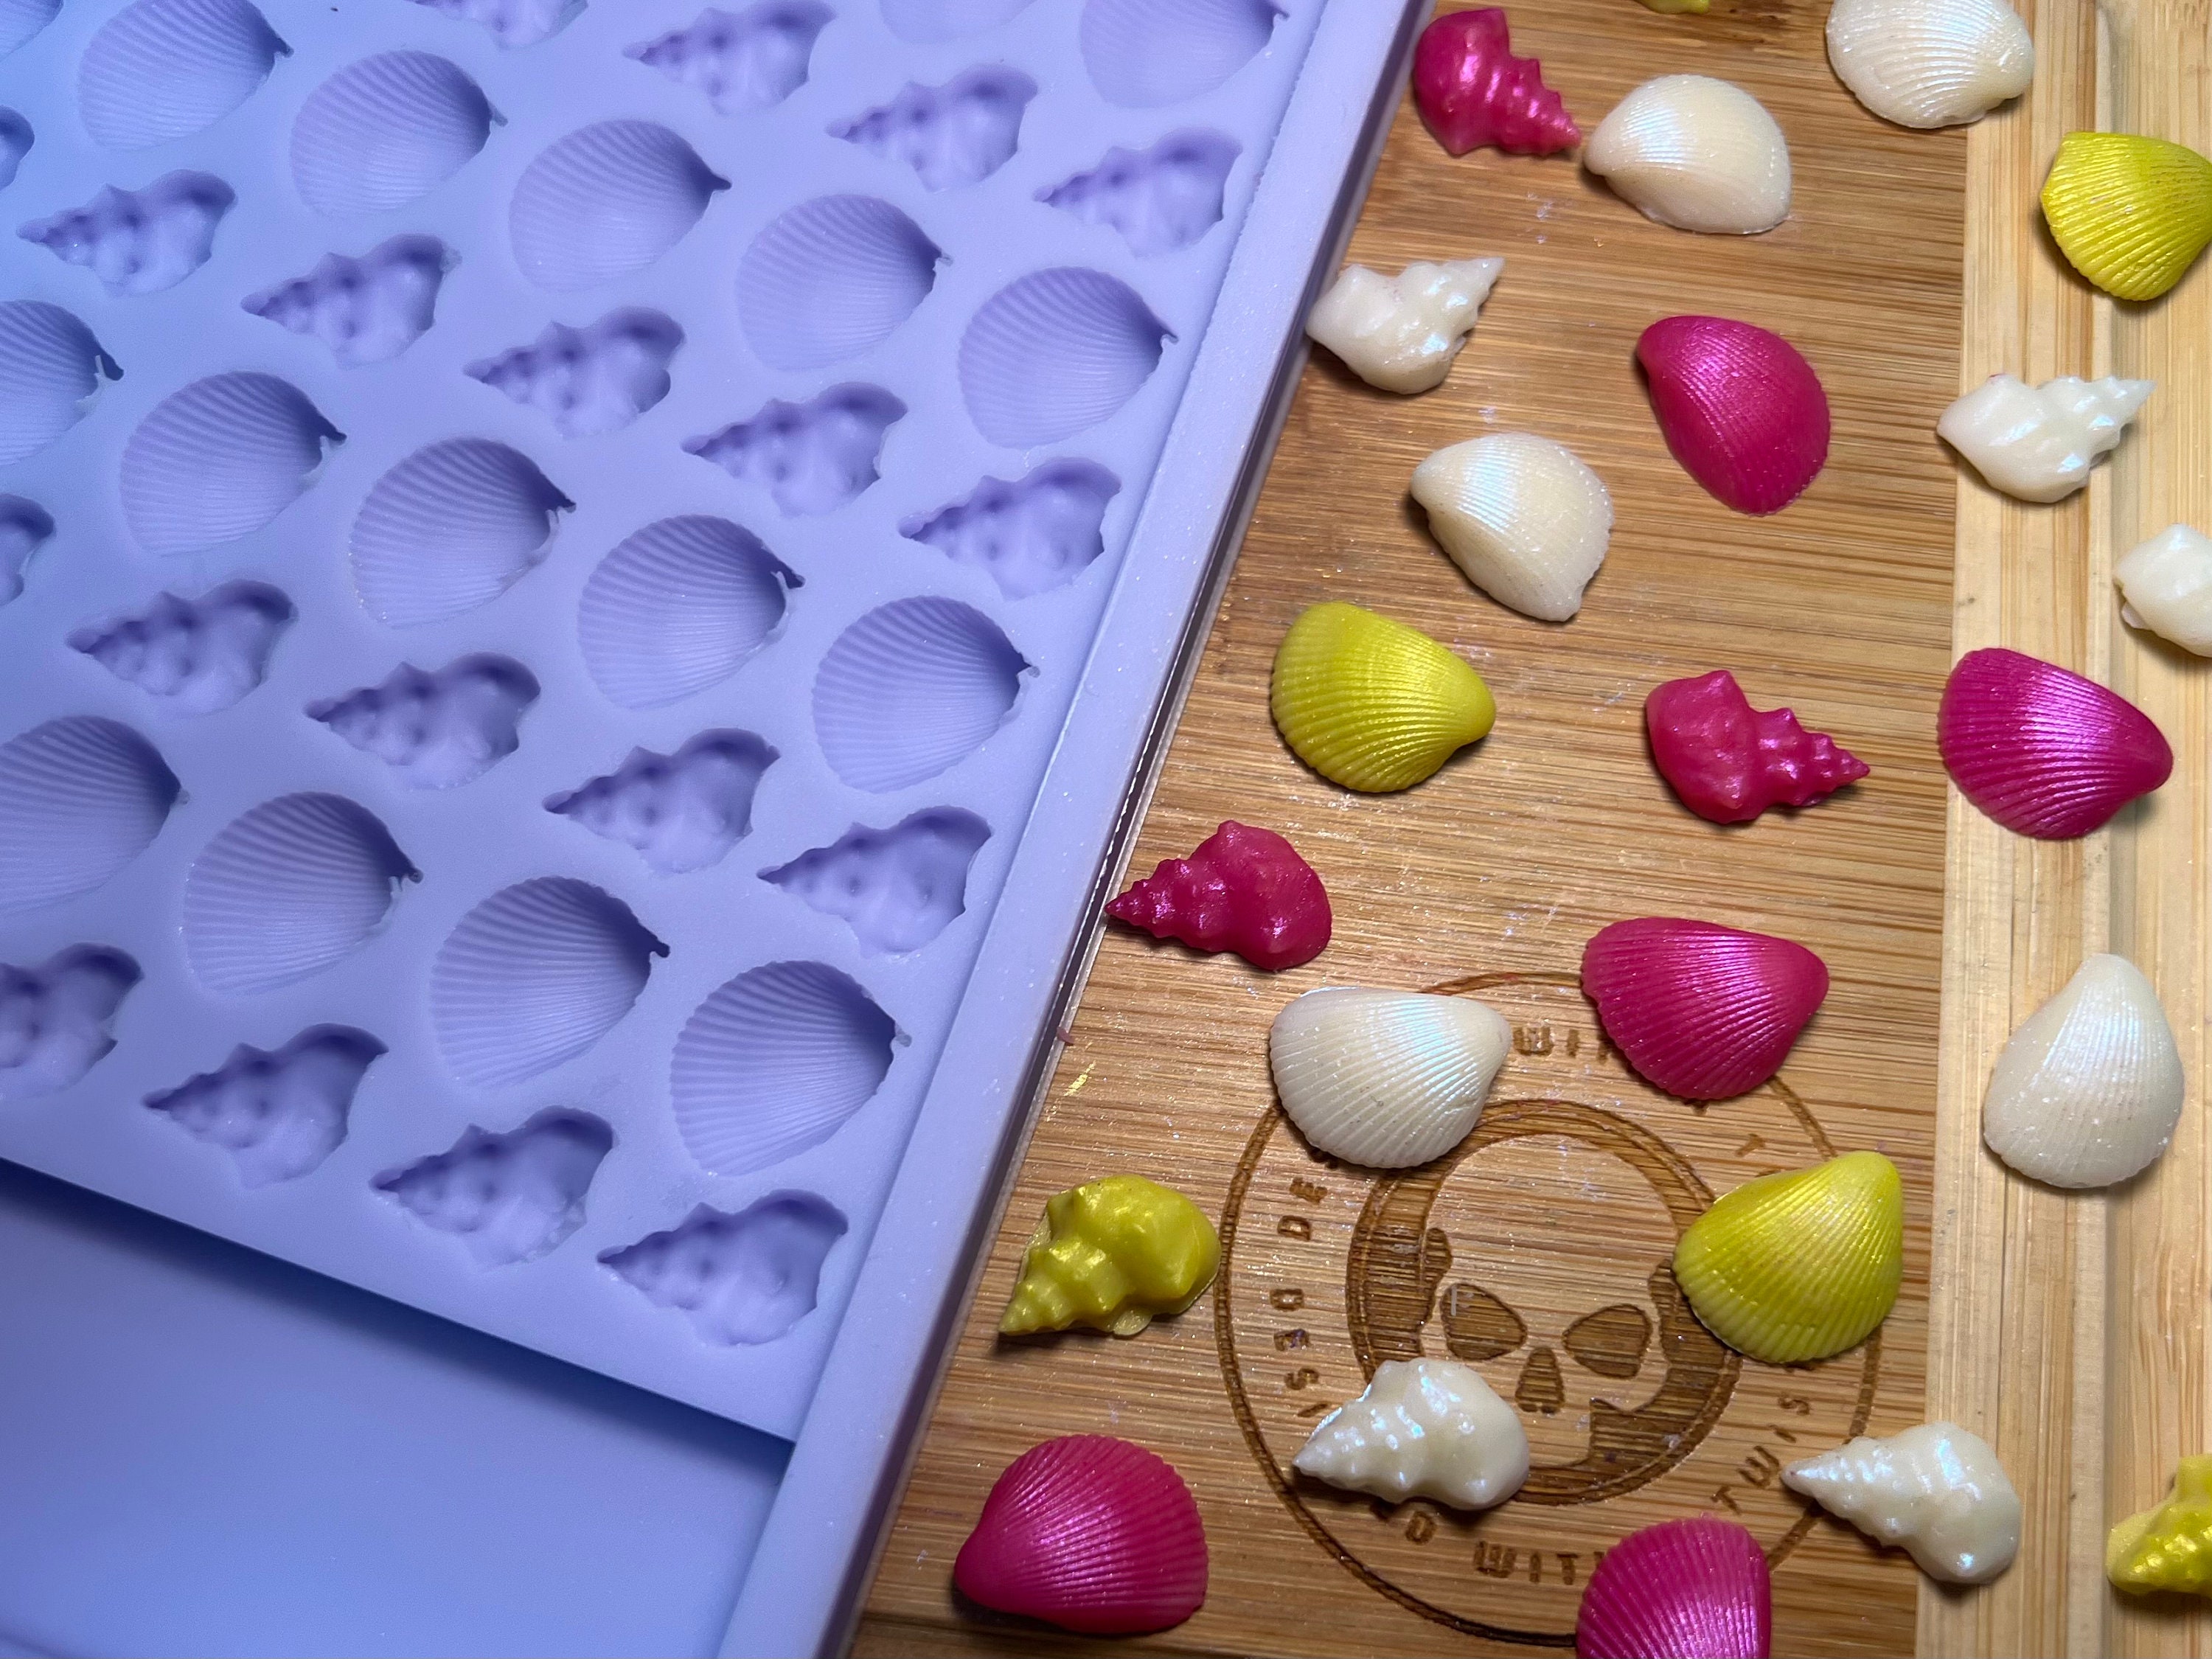 Valentines Hearts Snapbar Silicone Mold for Resin. Wax Melt Silicone Mould.  